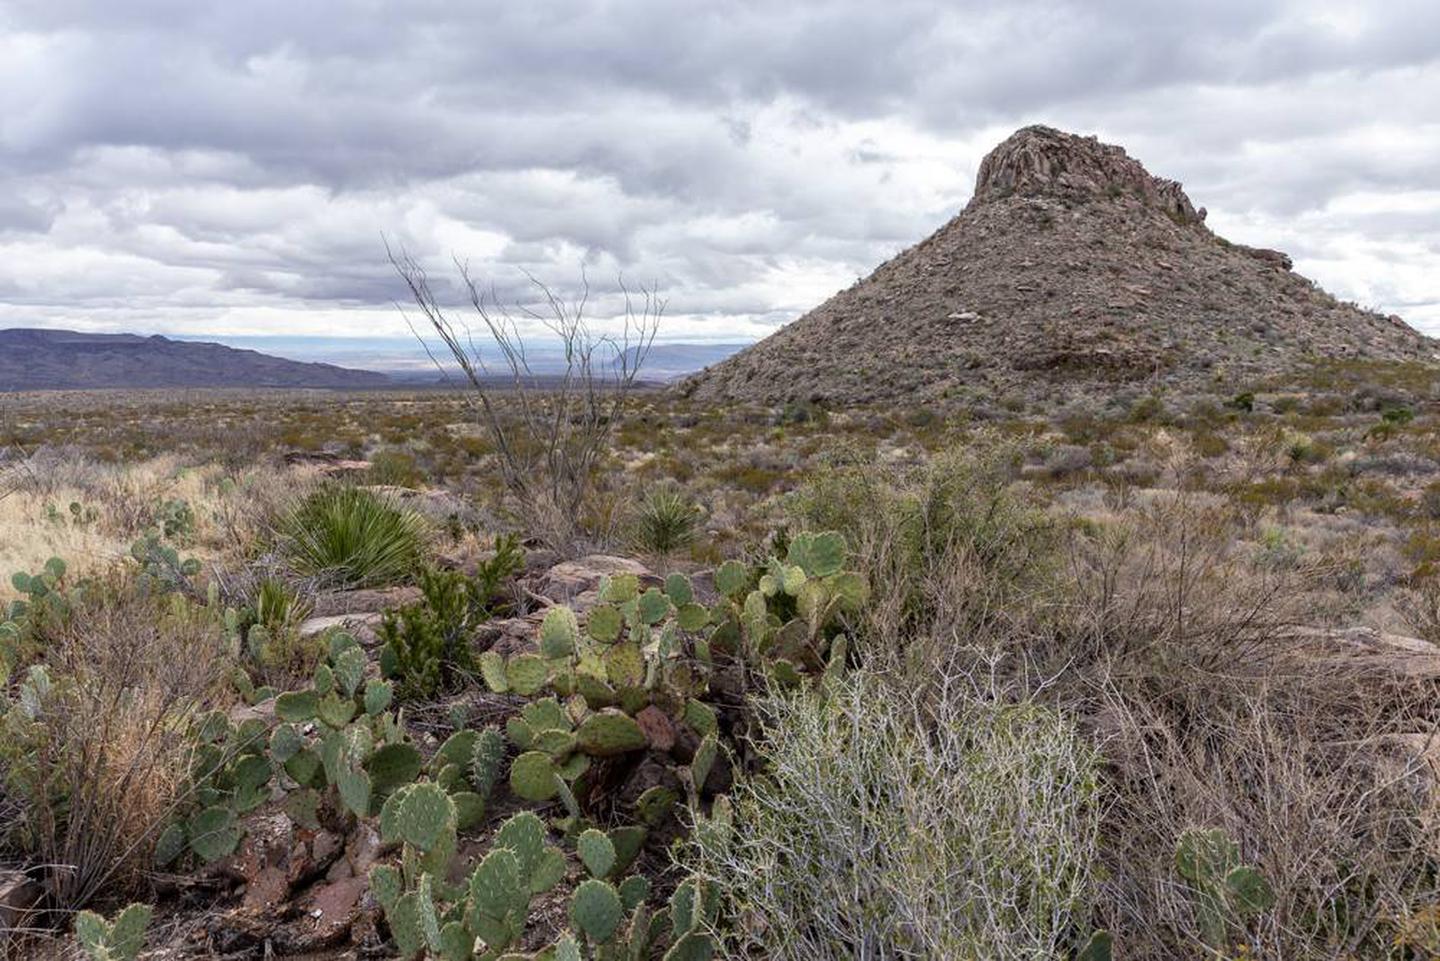 Scenic View from the campsiteChihuahuan Desert and mountains surround this scenic spot.